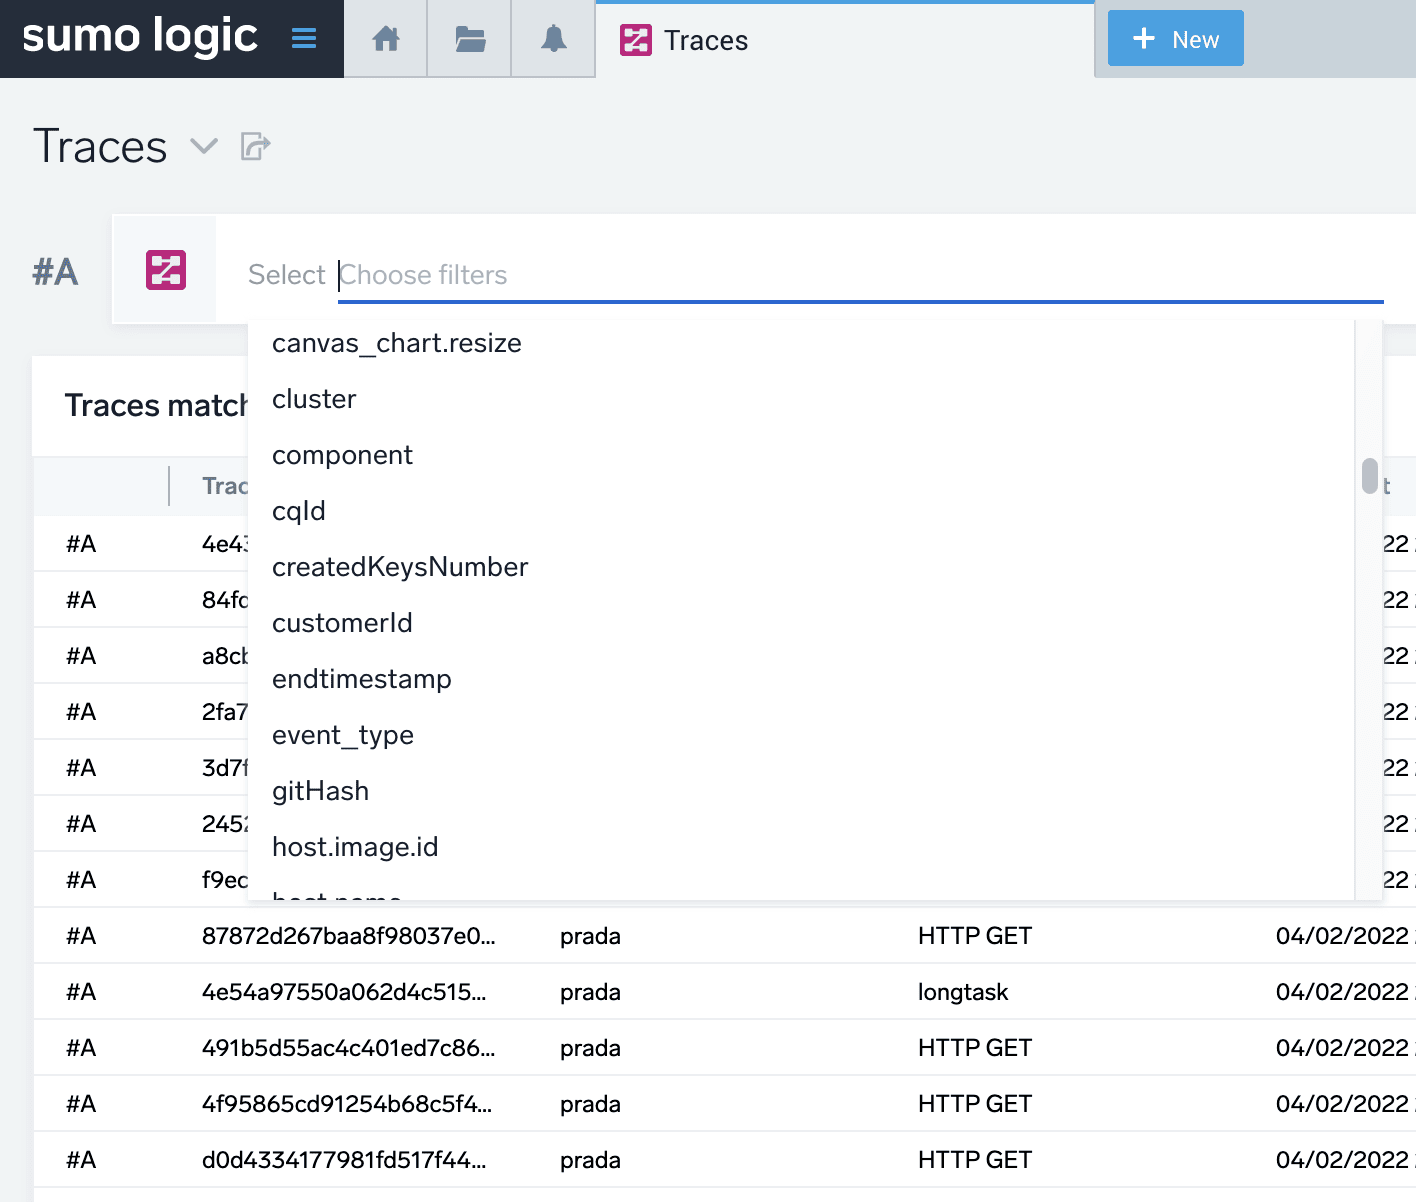 Filter Traces by any custom tag